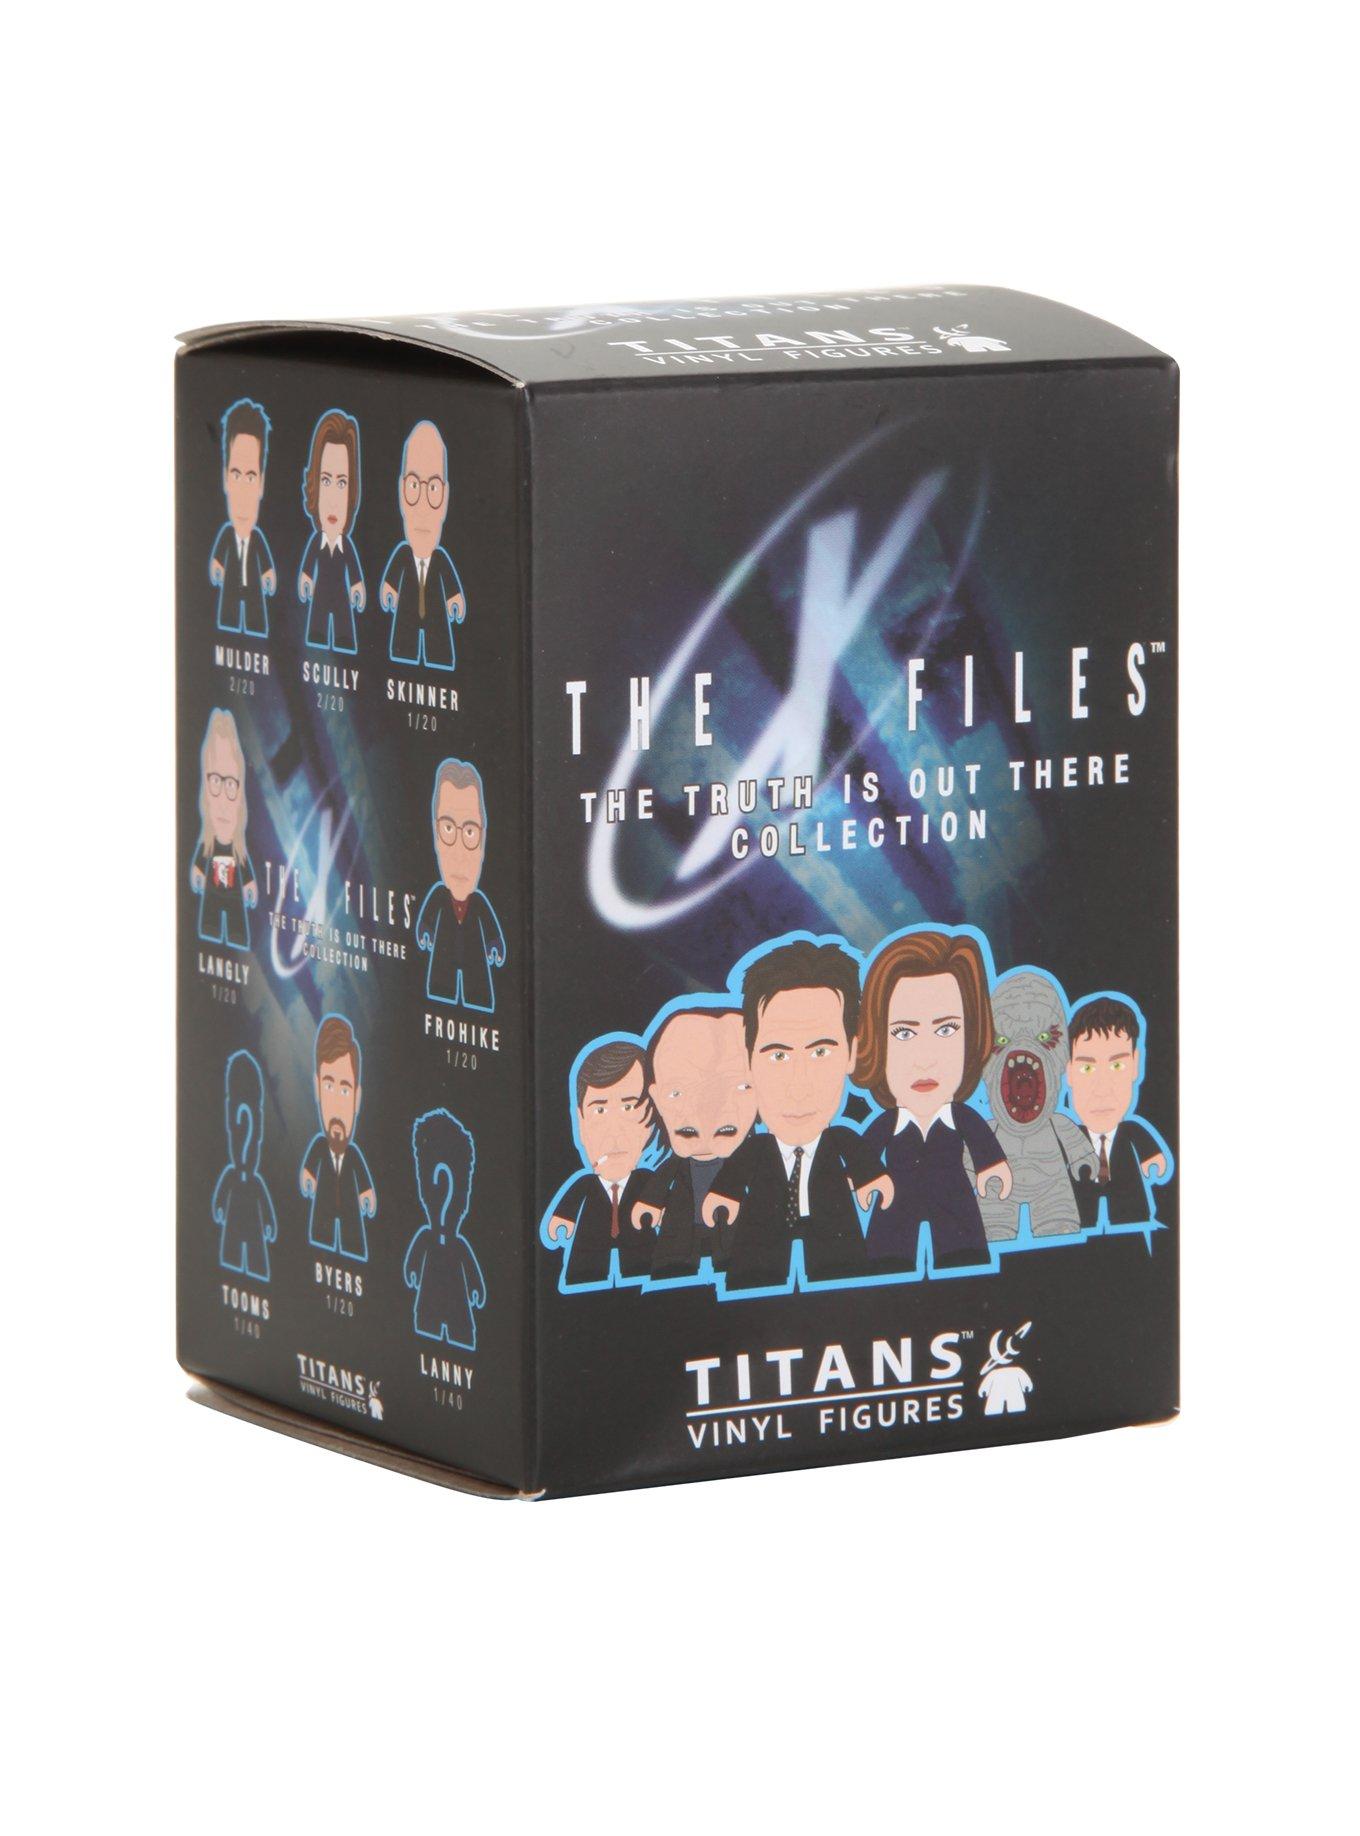 X-Files The Truth Is Out There Collection Titans Vinyl Figures Langly 1/20 